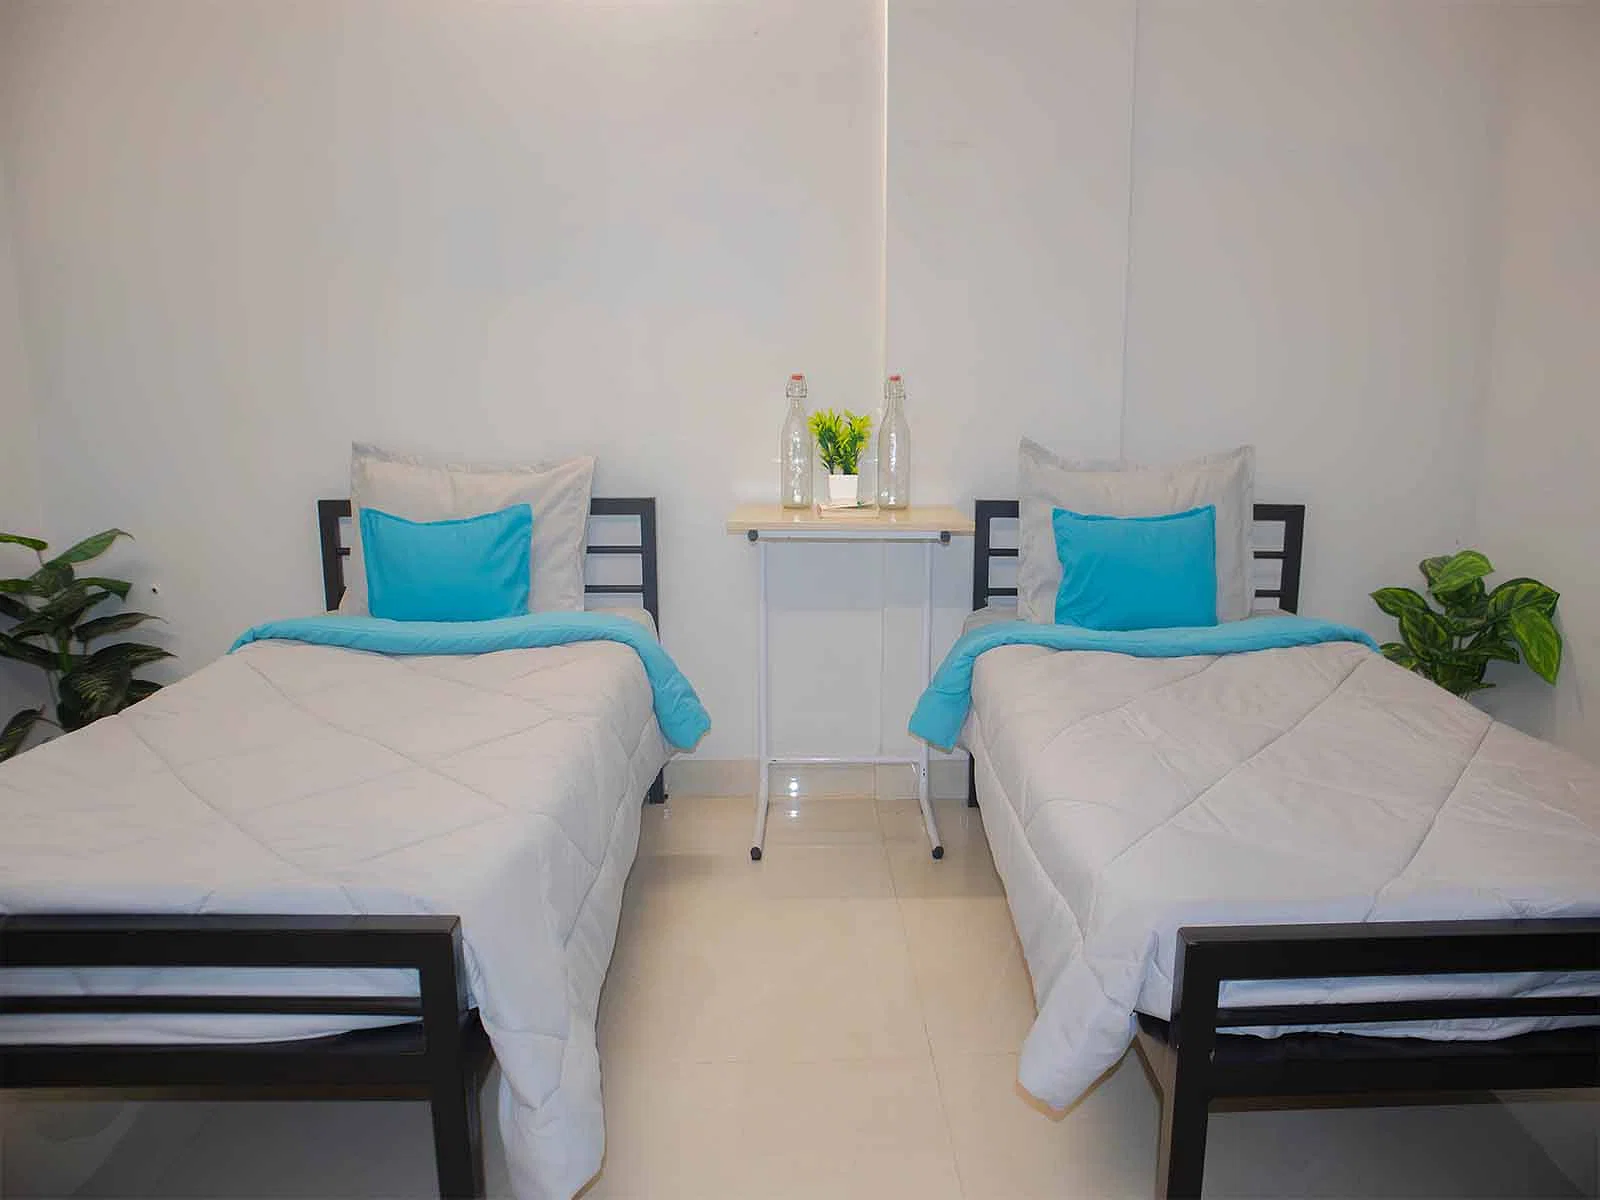 budget-friendly PGs and hostels for men and women with single rooms with daily hopusekeeping-Zolo Elegance